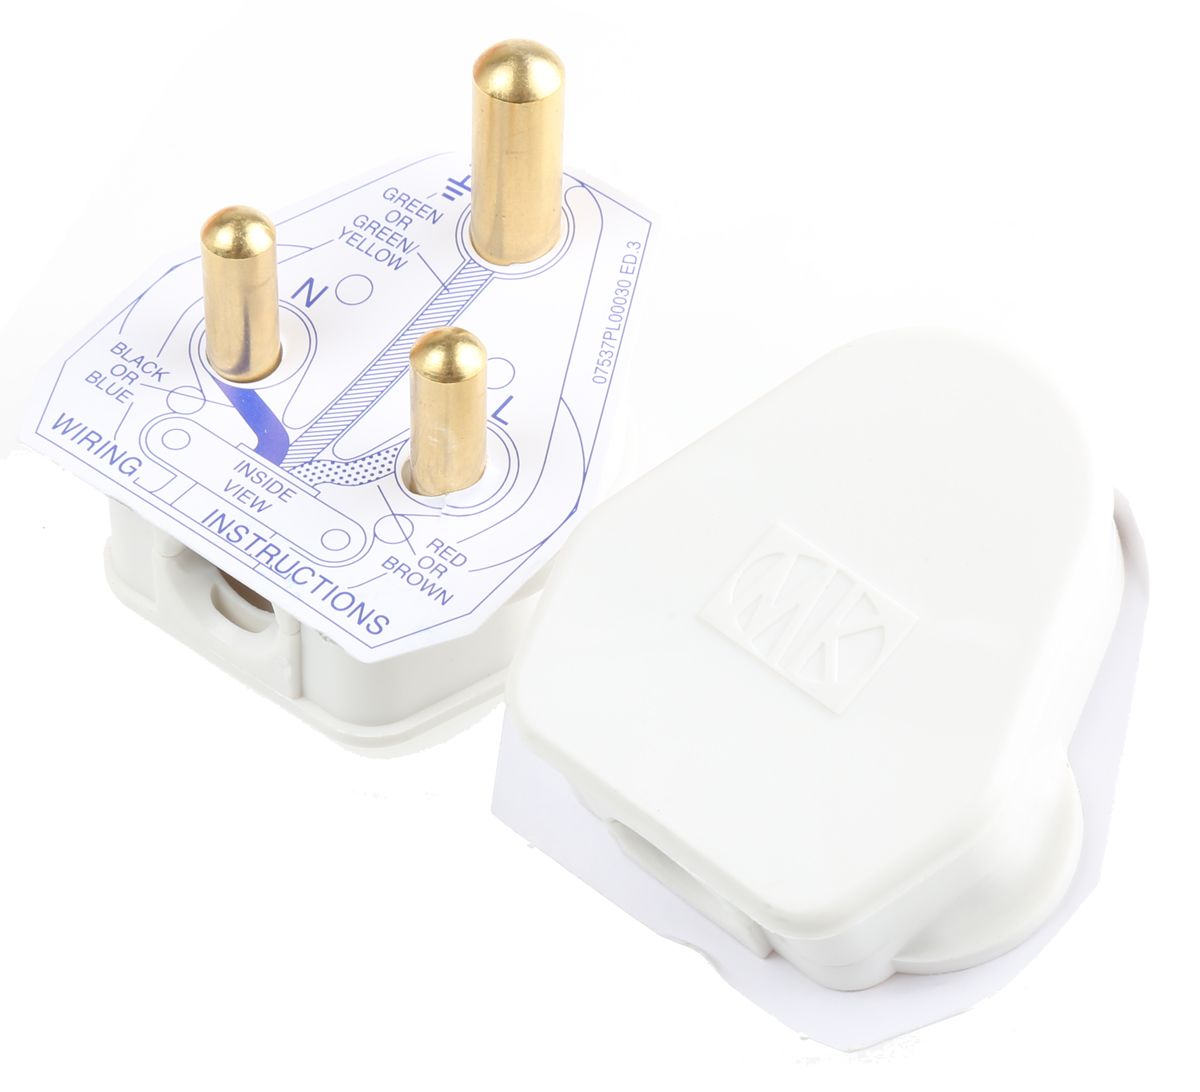 MK Electric UK Mains Plug, 15A, Cable Mount